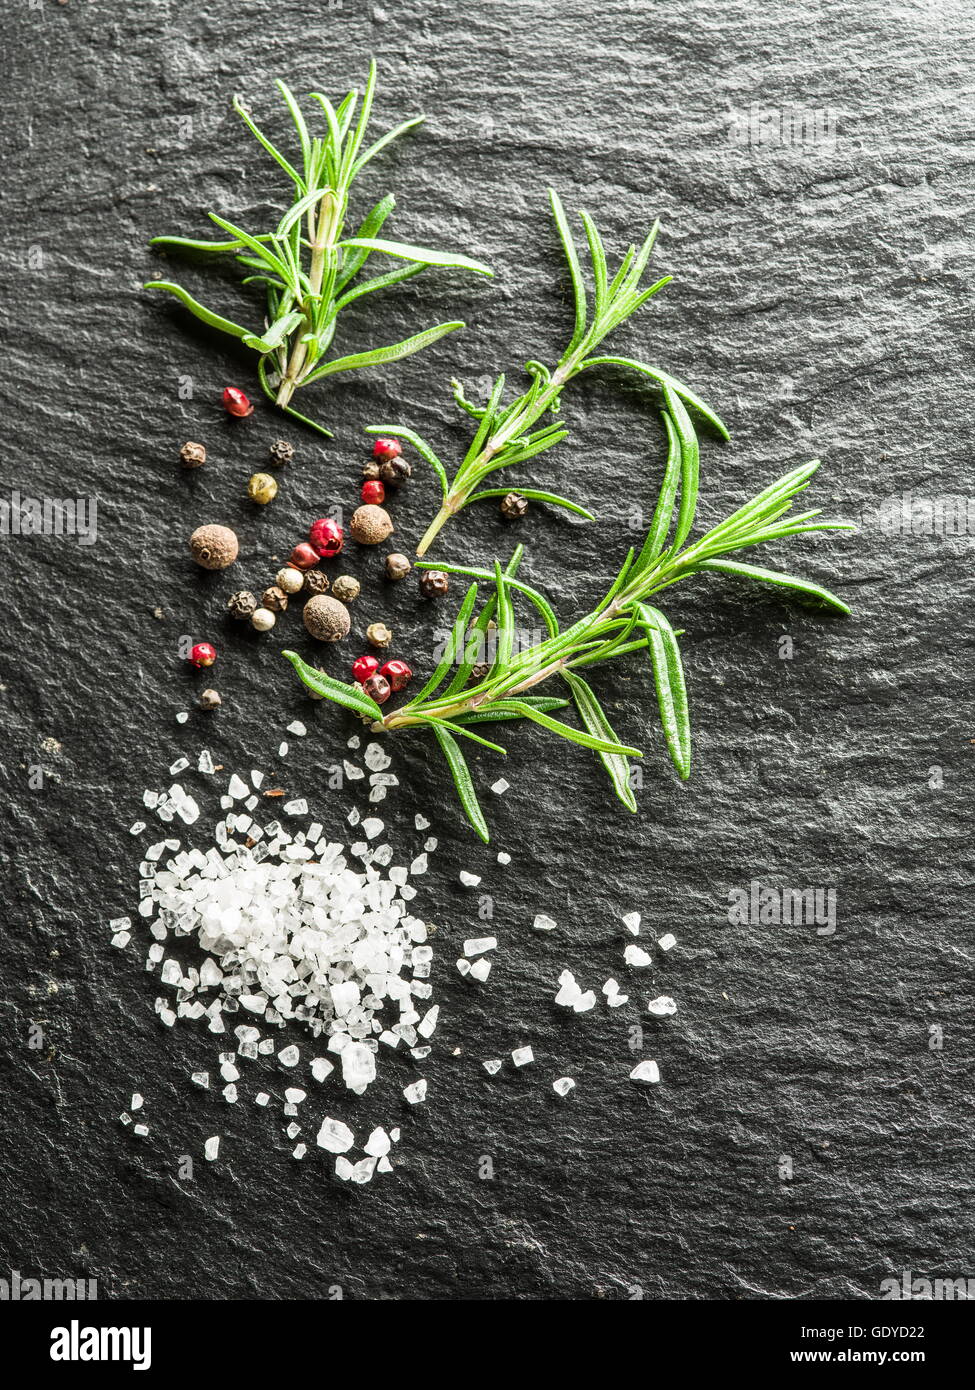 Salt, rosemary and peppercorns on the graphite board. Stock Photo